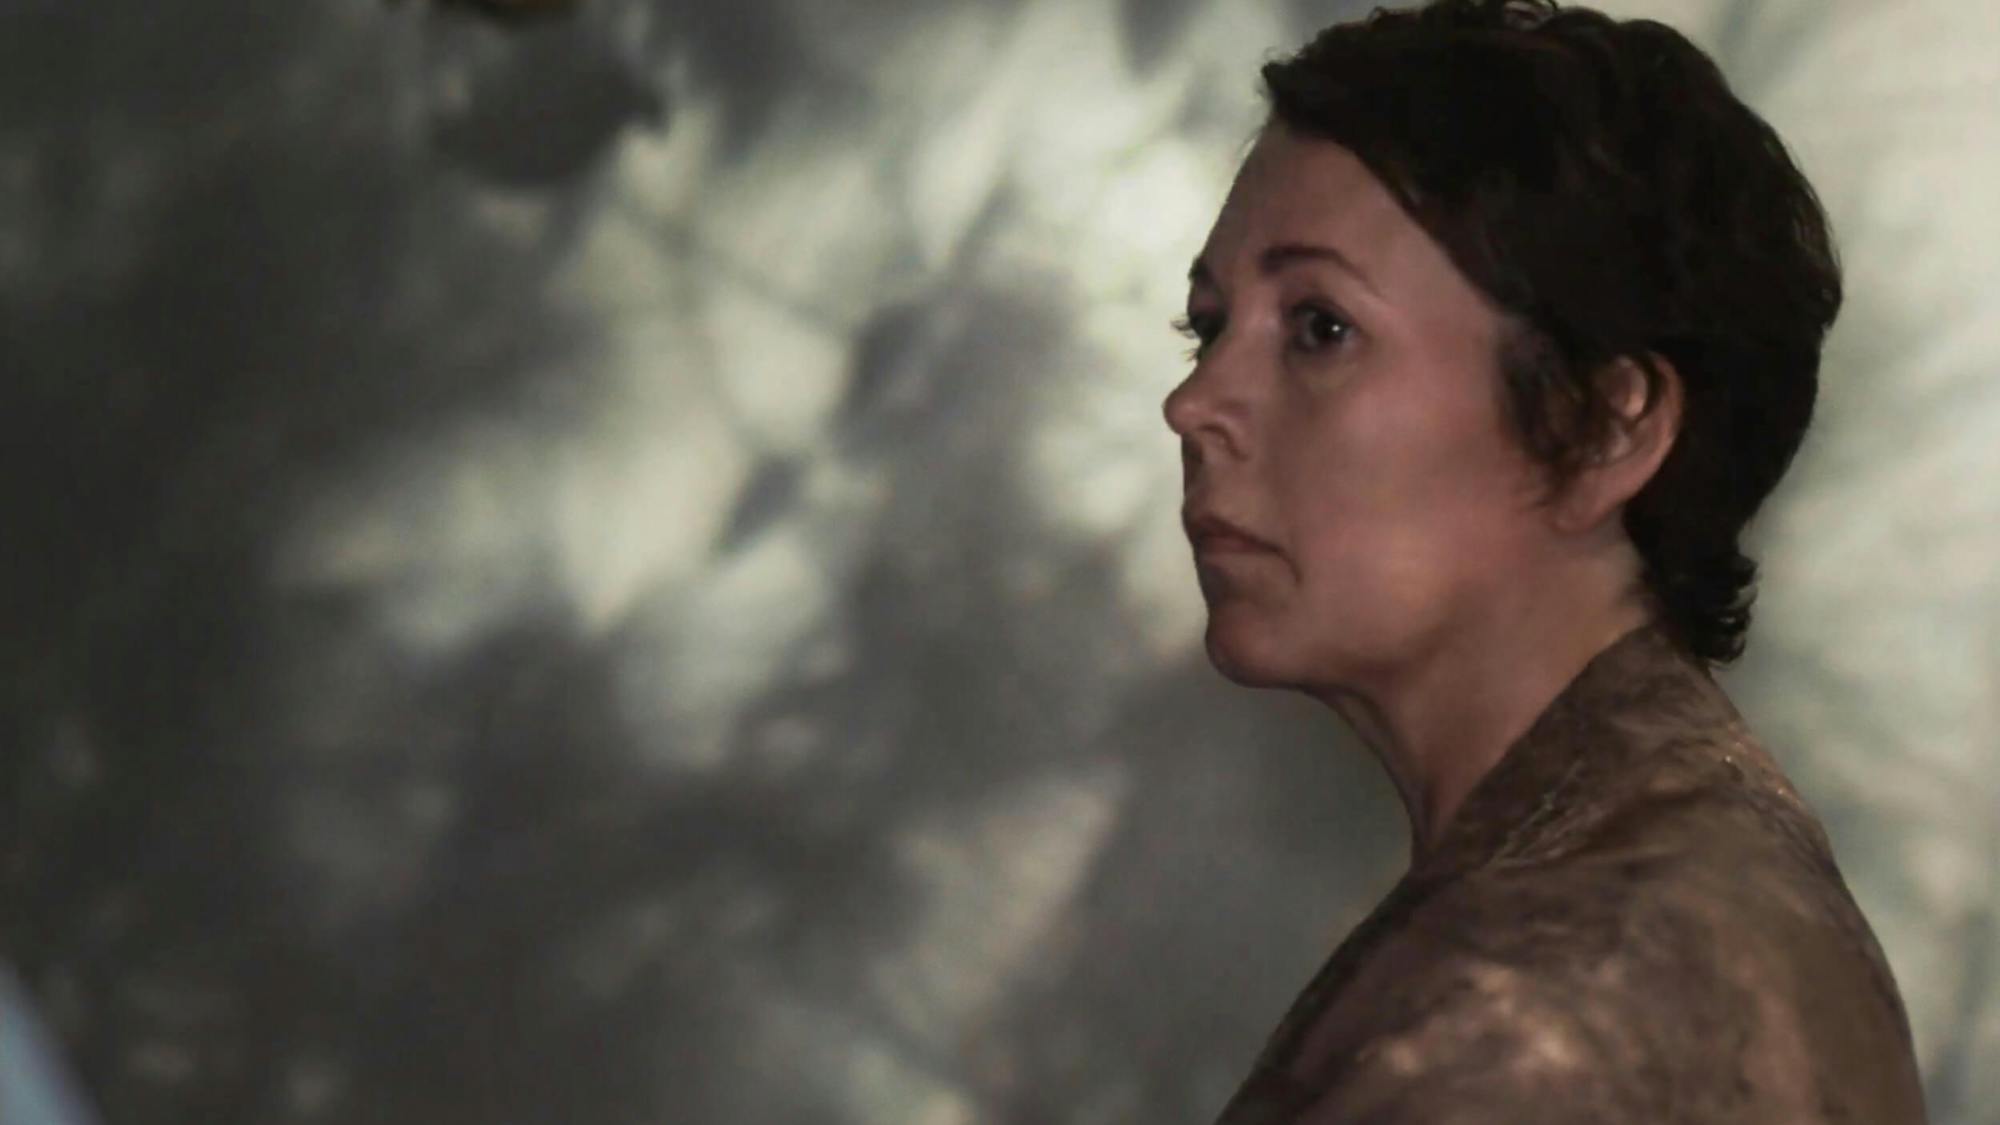 Leda (Olivia Colman) wears a tan shirt. The wall behind her is shadowed with trees and leaves.